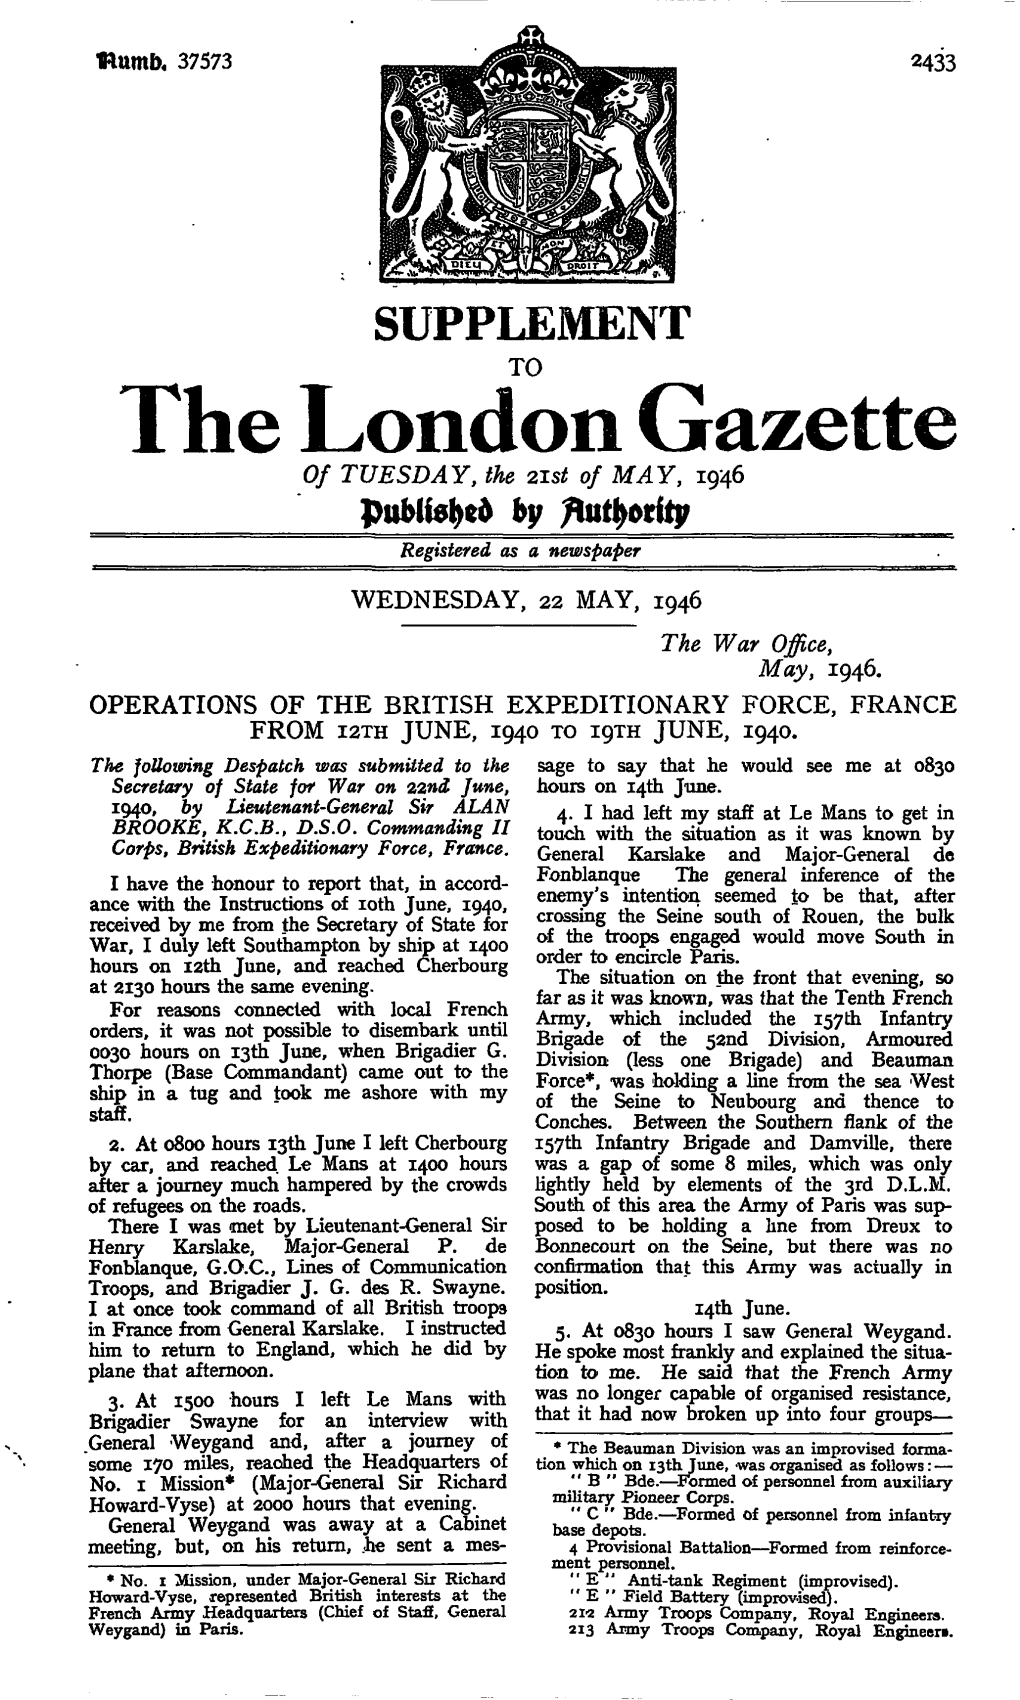 The London Gazette of TUESDAY, the 2Ist of MAY, 1946 by Fiufyttity Registered As a Newspaper WEDNESDAY, 22 MAY, 1946 the War Office, May, 1946